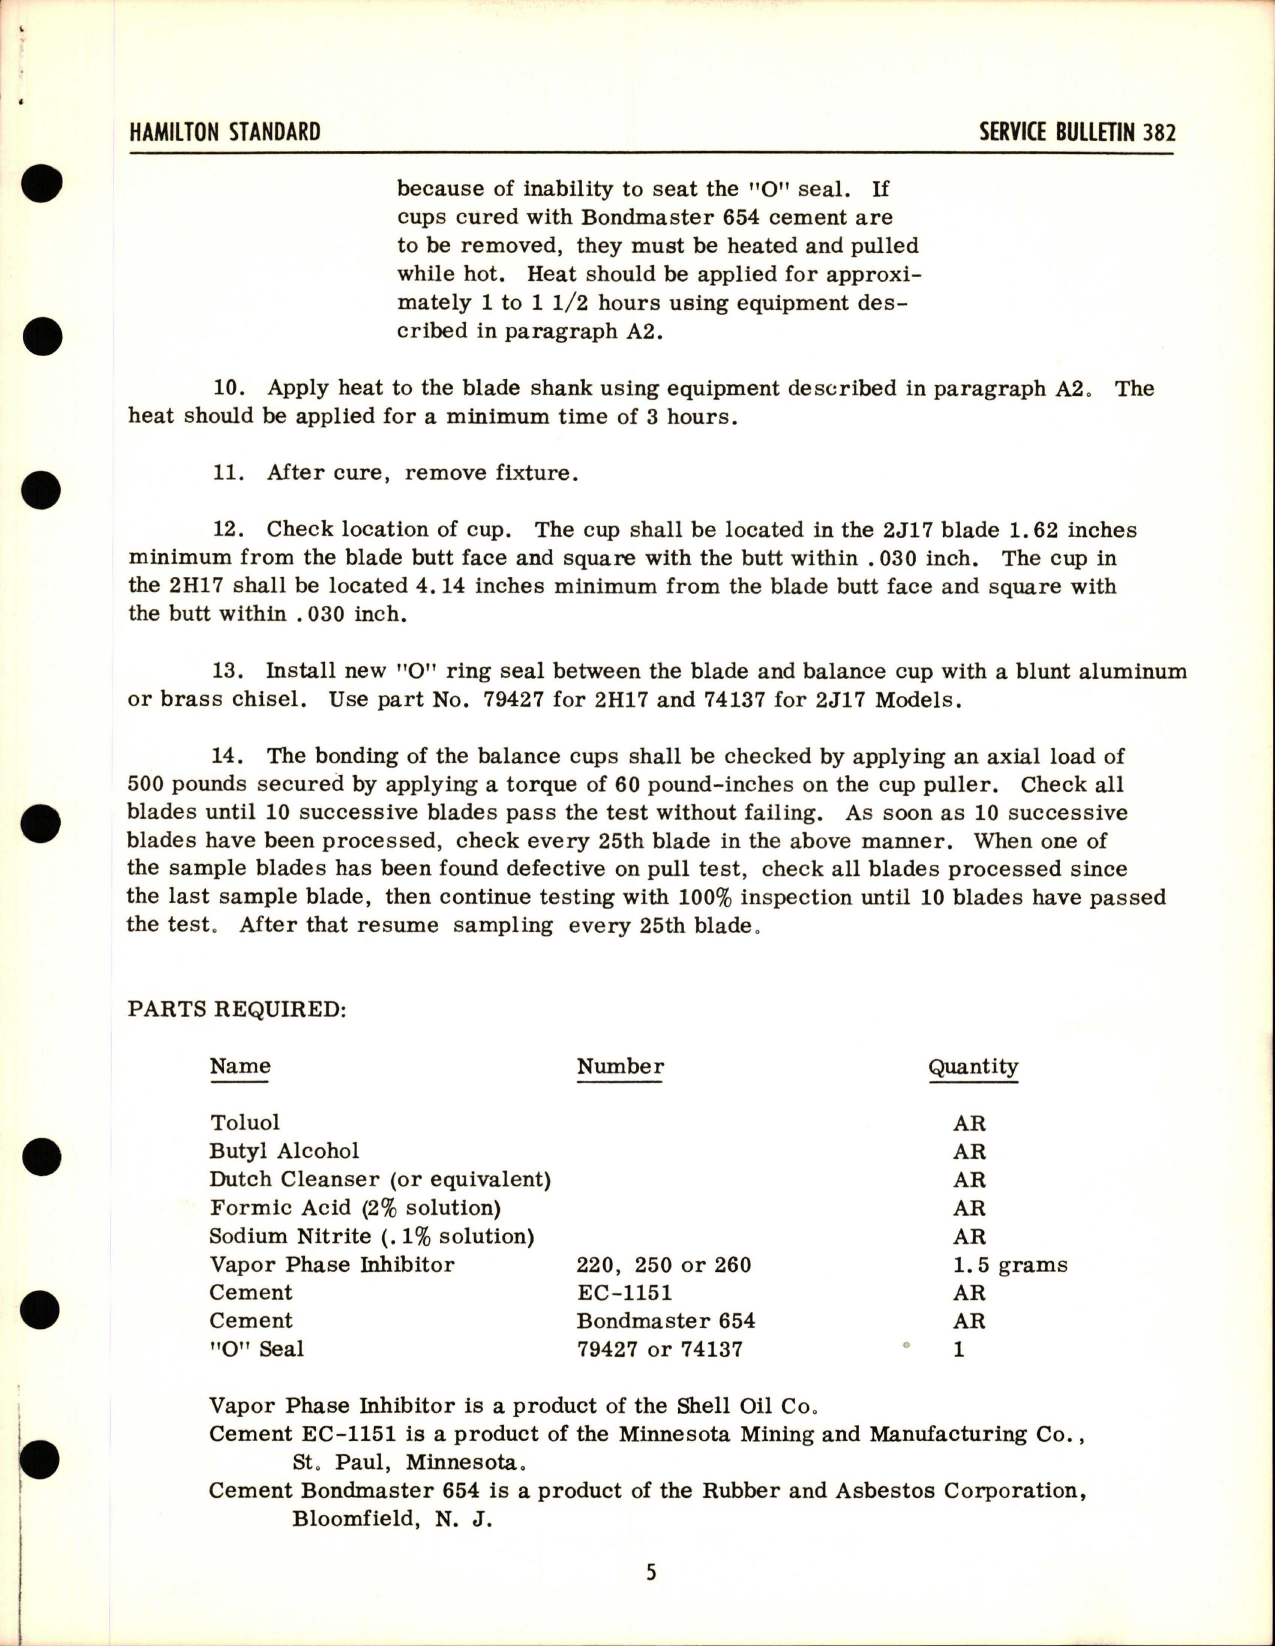 Sample page 5 from AirCorps Library document: Steel Blade Shank Bore Inspection for Corrosion